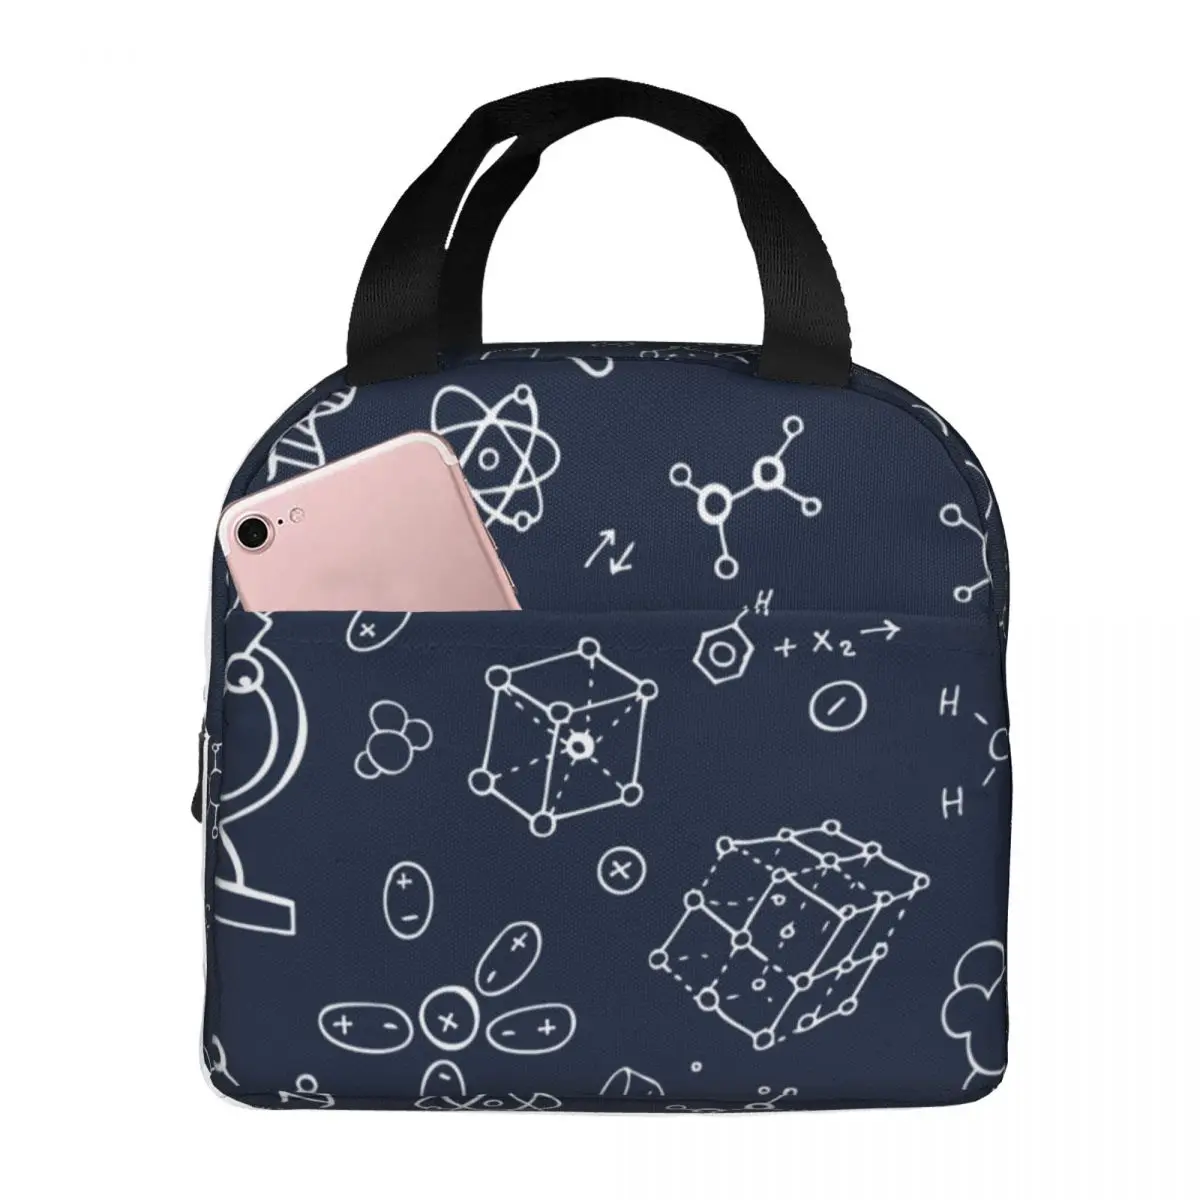 Science Chemistry Pattern Lunch Bags Portable Insulated Canvas Cooler Thermal Picnic Tote for Women Girl